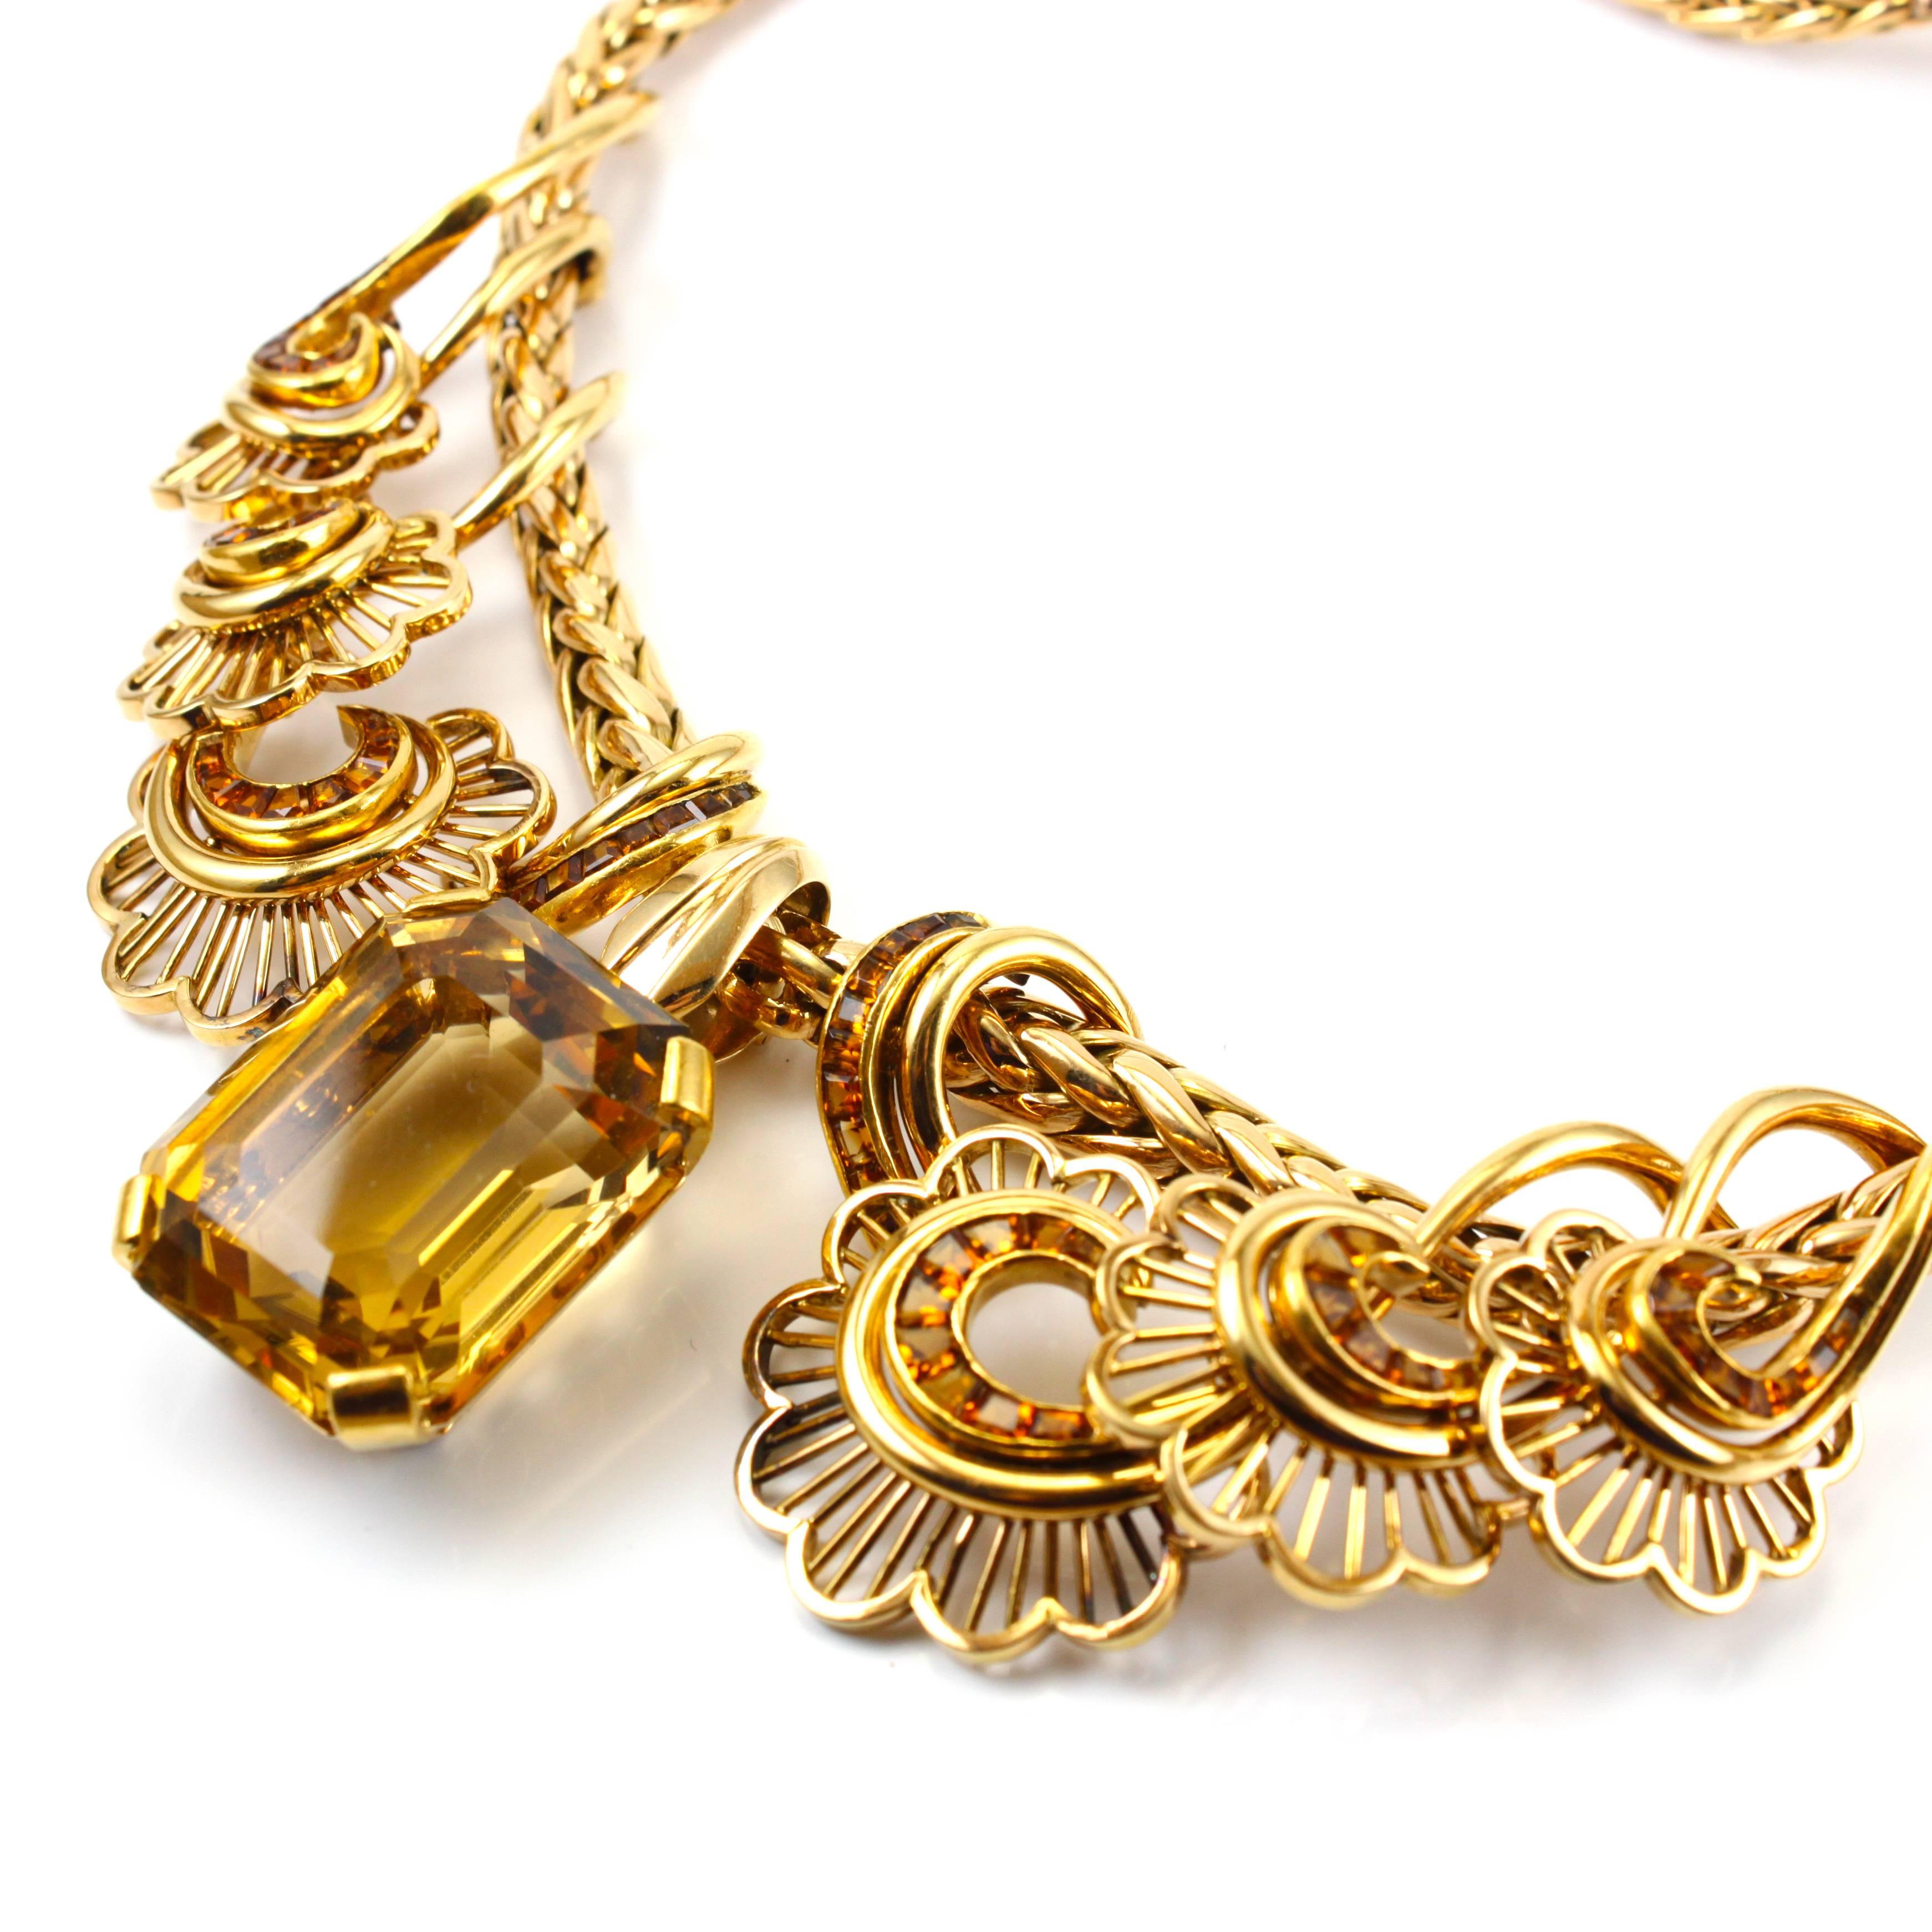 Beautiful retro necklace in 18k yellow gold, France, 1940s. The centre stone is a big emerald cut citrine, weighing circa 60 carats, it can also be detached and worn as a pendant. The floral design on either side of the centre stone is accentuated